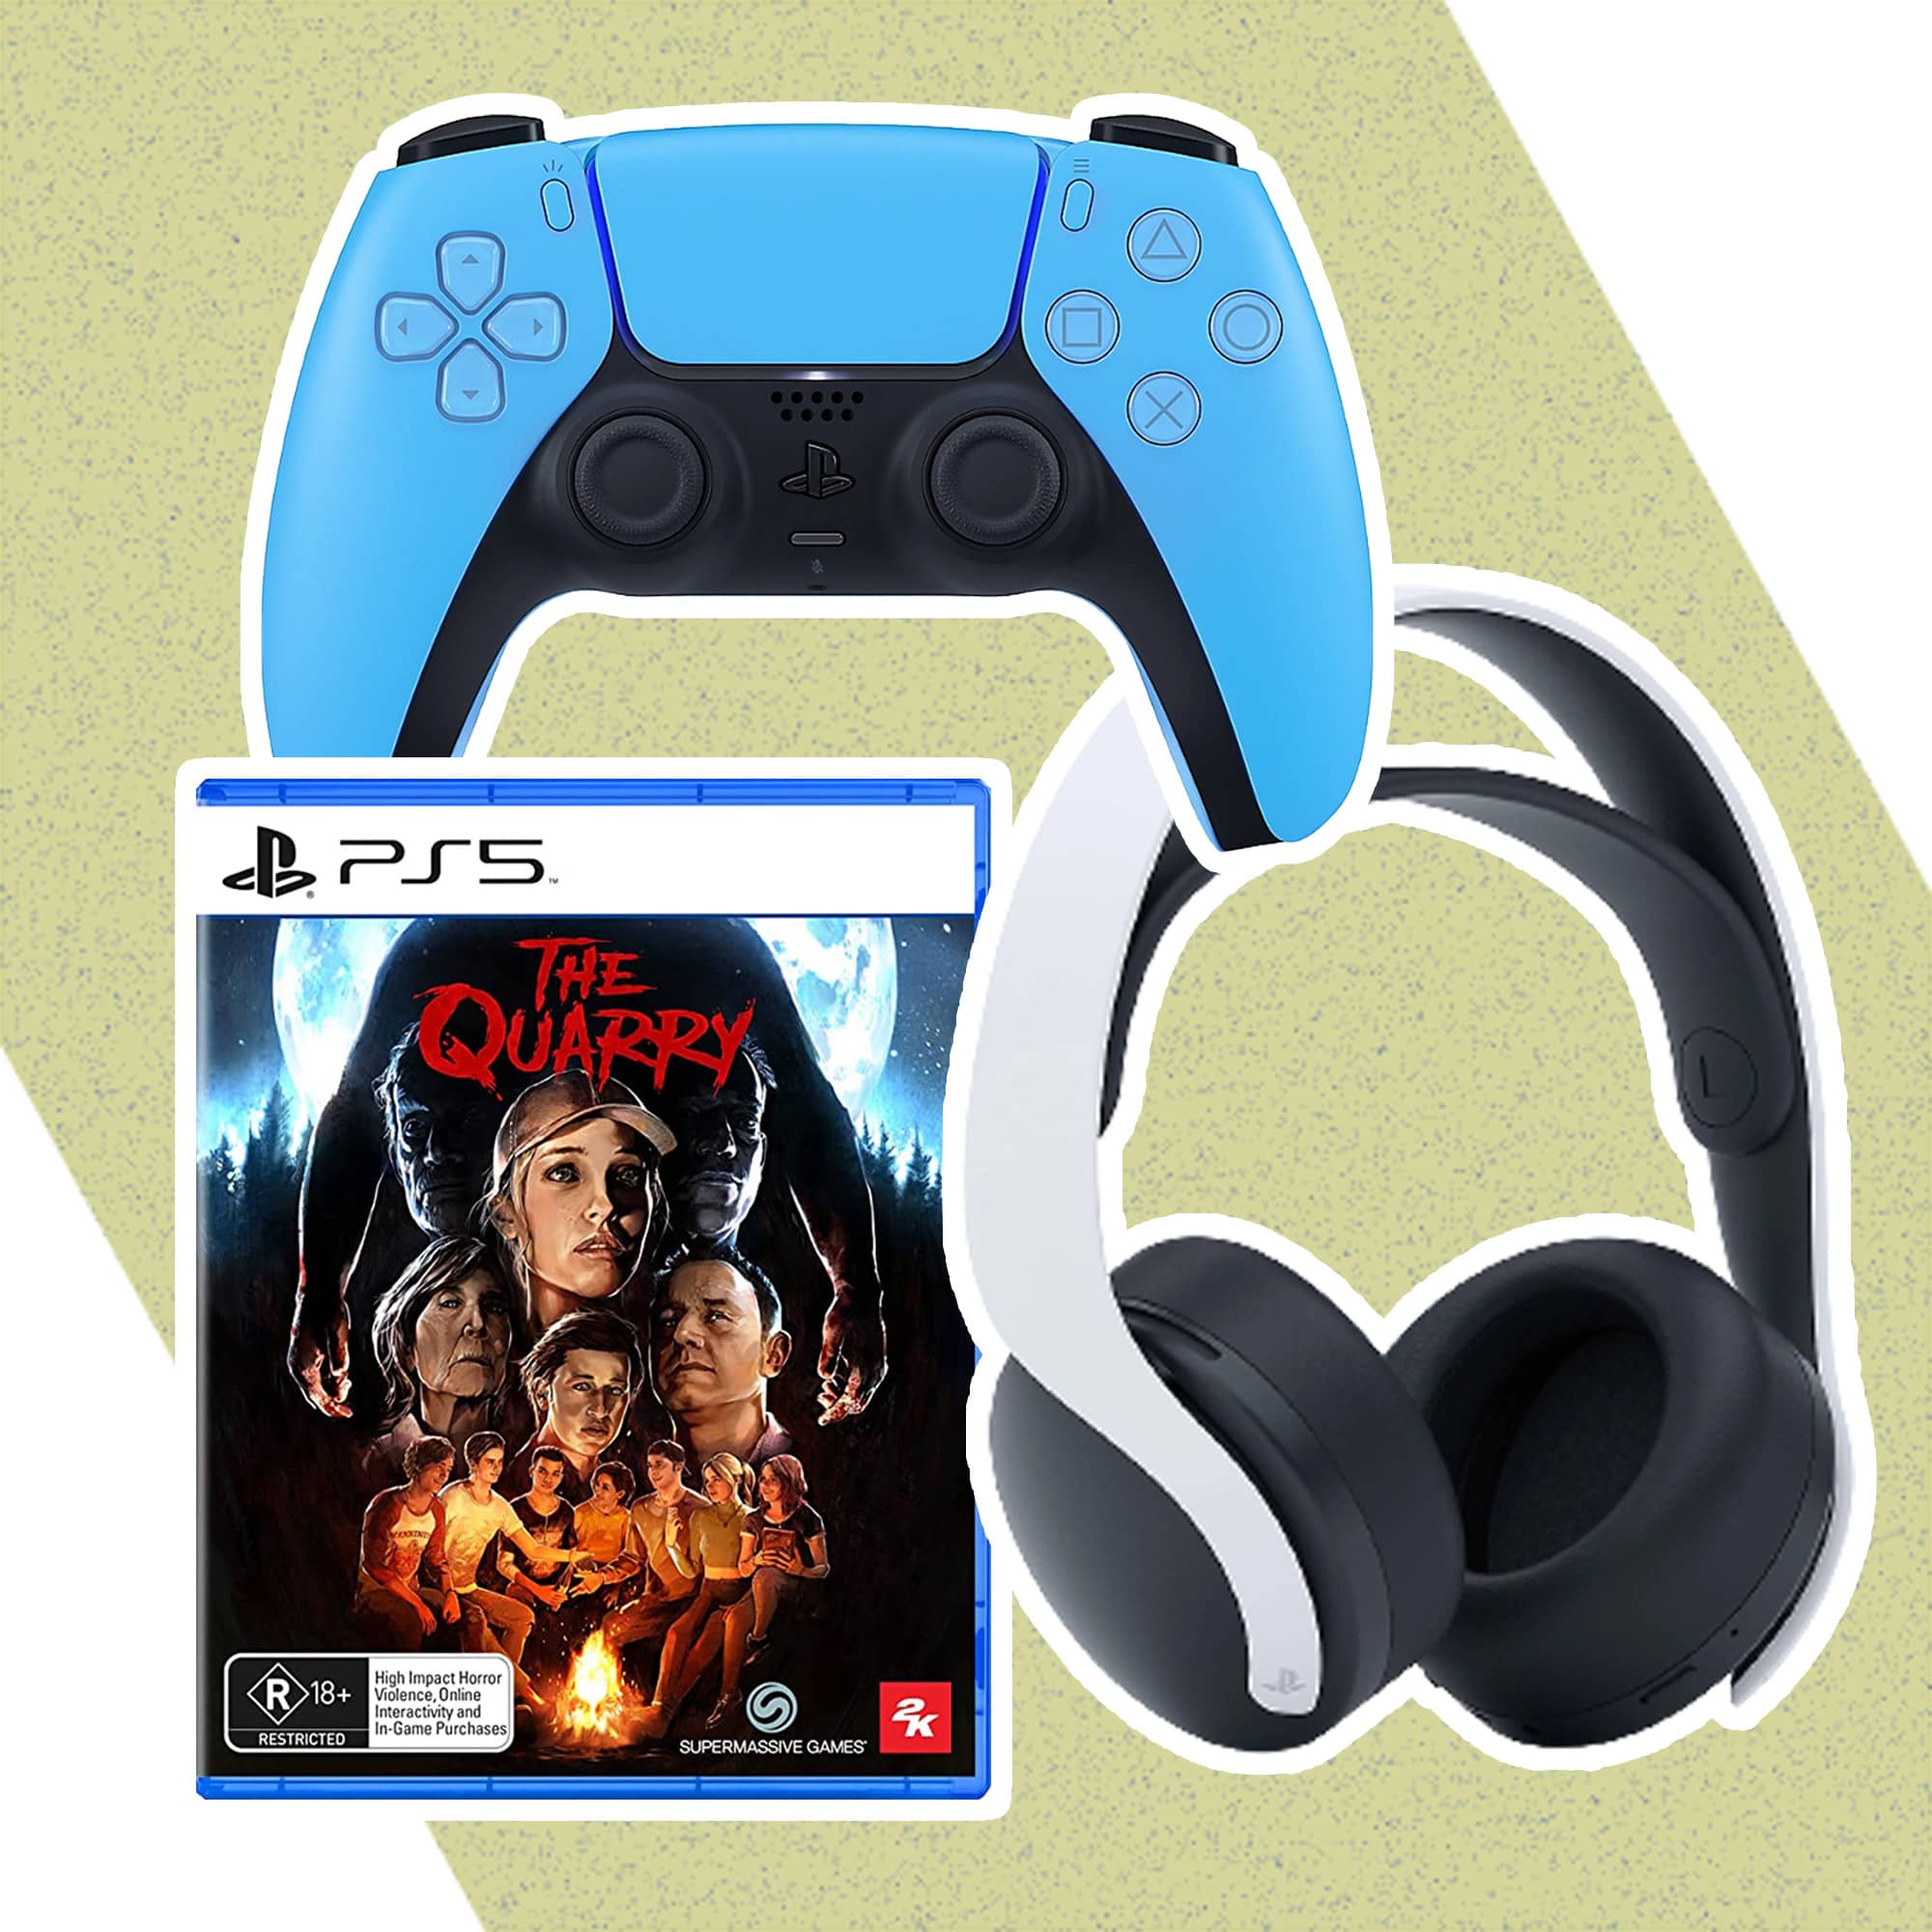 Starlight Blue PS5 DualSense Wireless Controller, Pulse 3D Wireless headset and The Quarry on PS5.